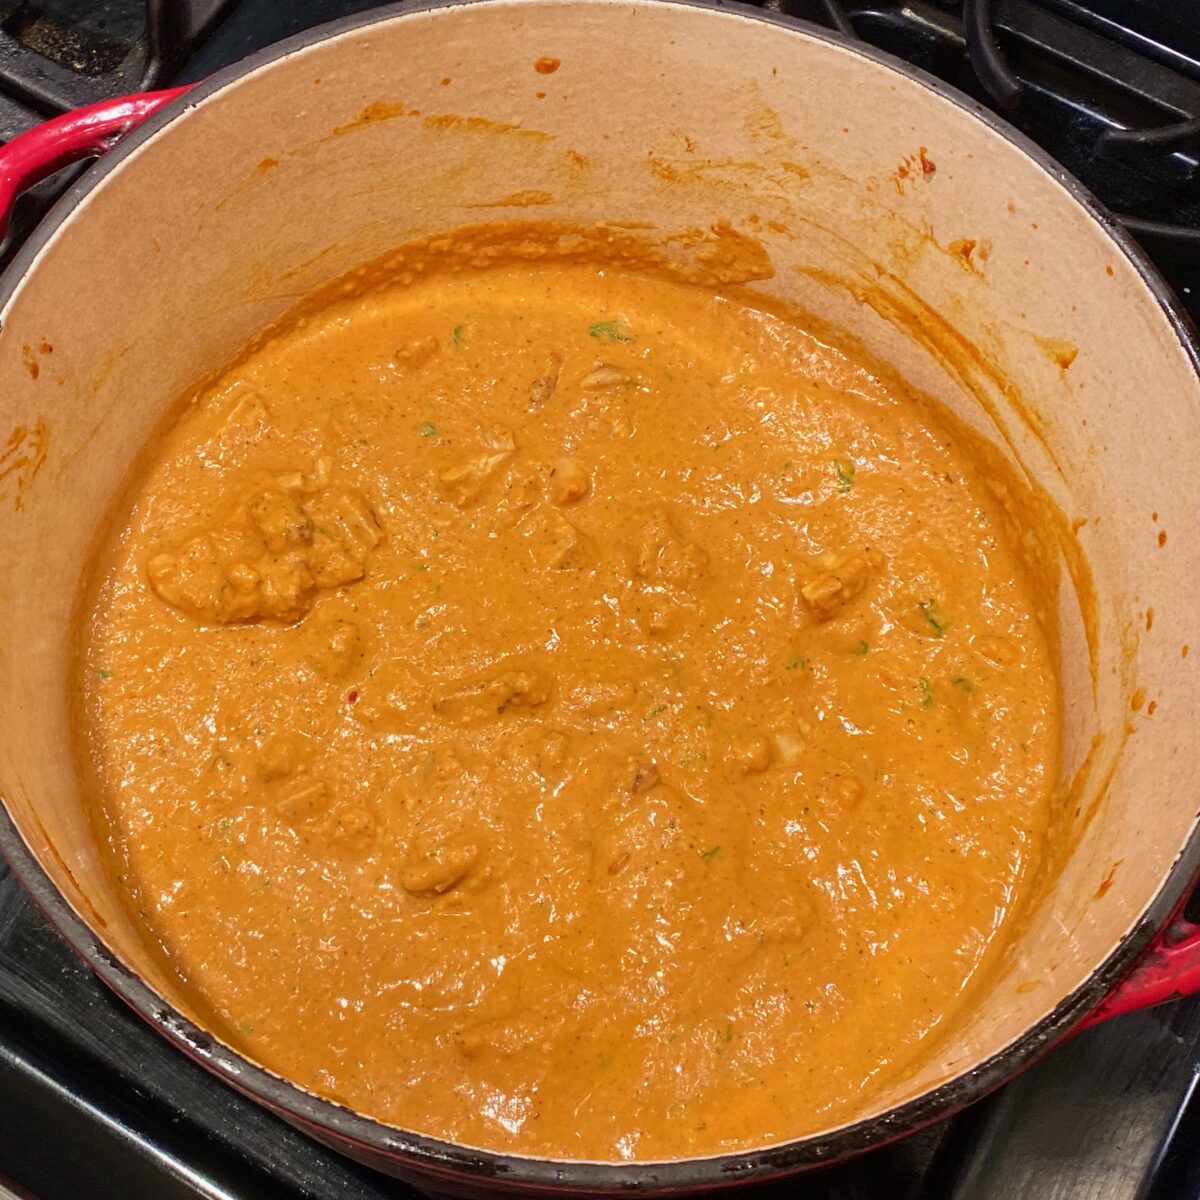 The finished butter chicken simmering just before serving.